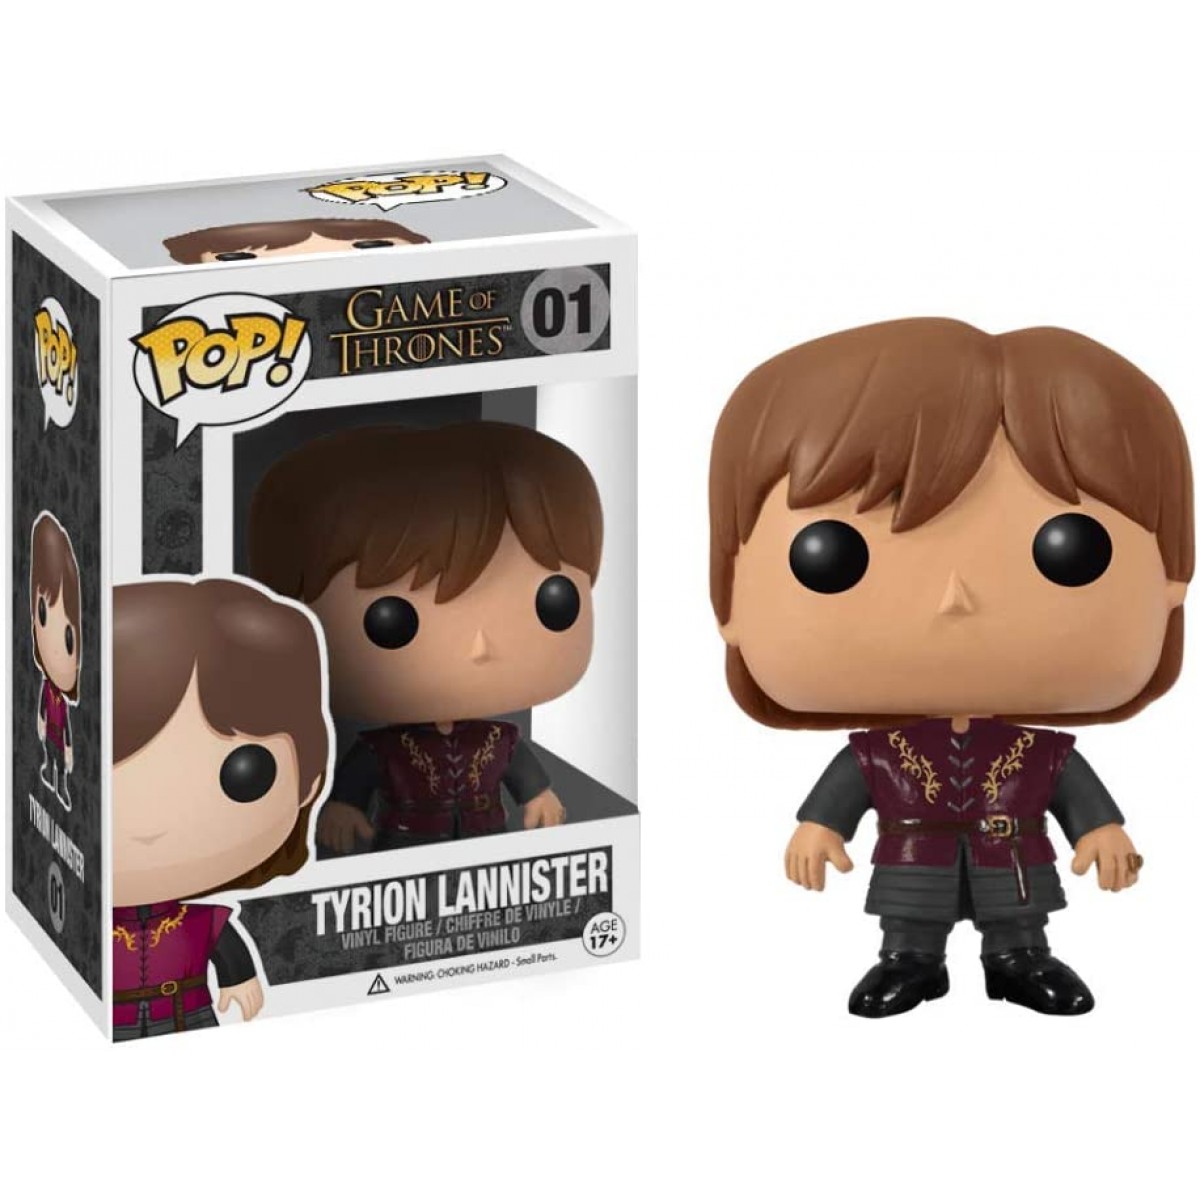 Funko POP! Game of Thrones Tyrion Lannister N 3014